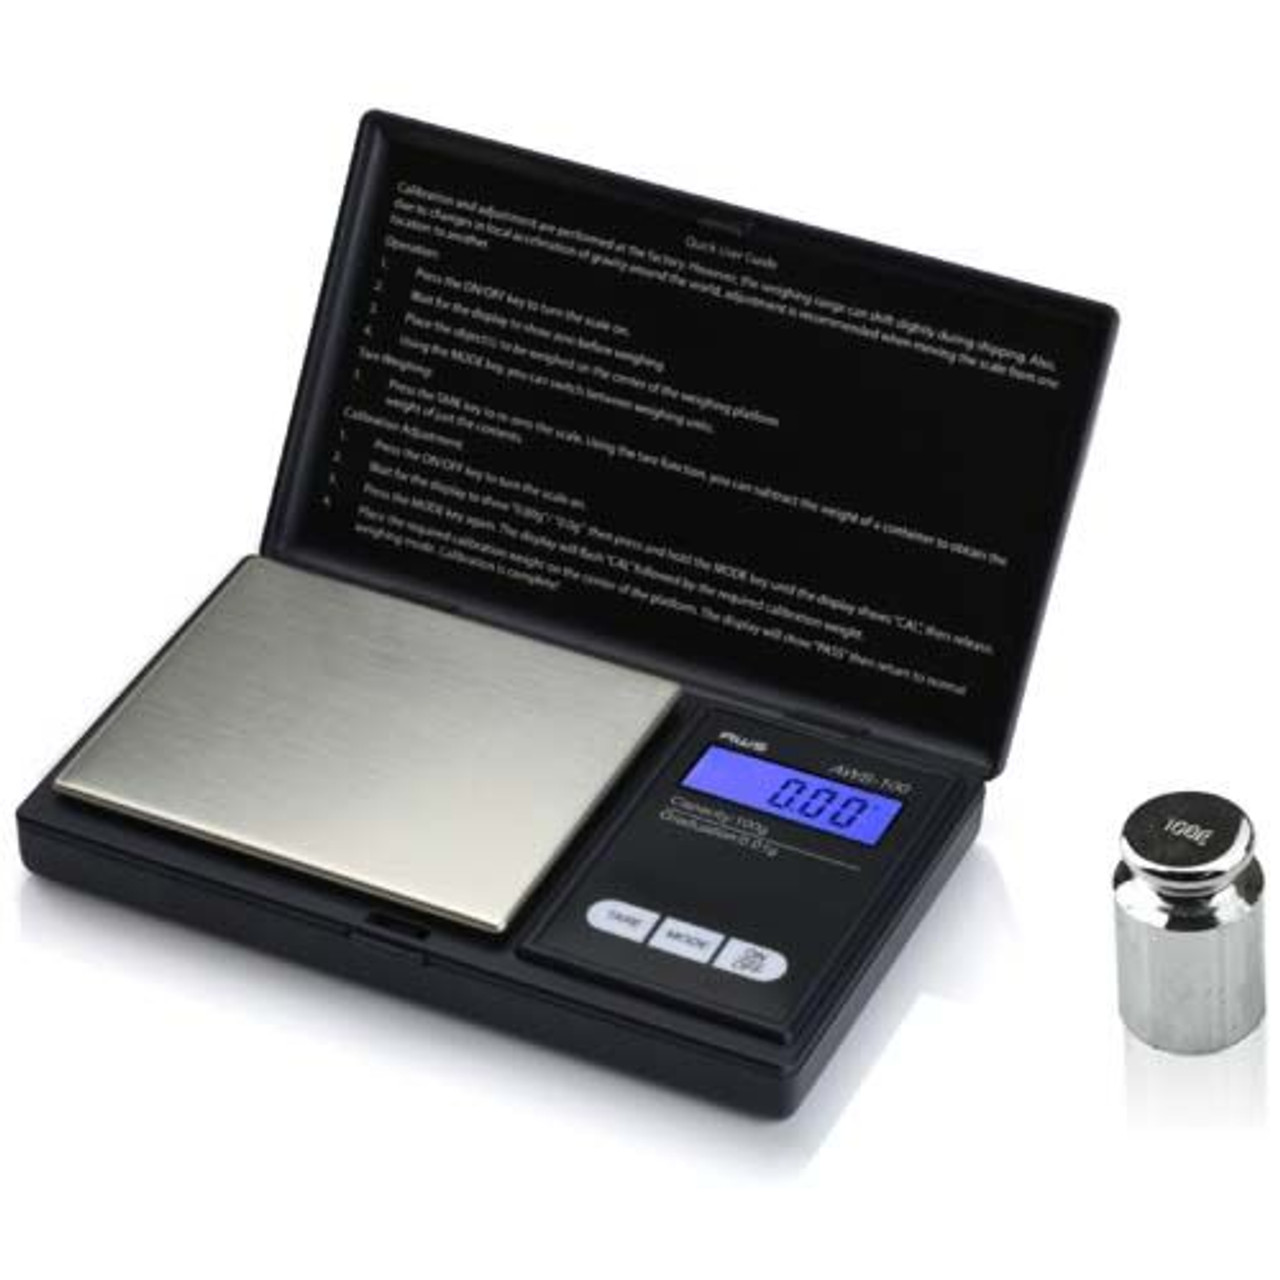 American Weigh Scales CD Mini Series Compact Stainless Steel Digital  Portable Pocket Weight Scale 500G X 0.1G - Great For Kitchen